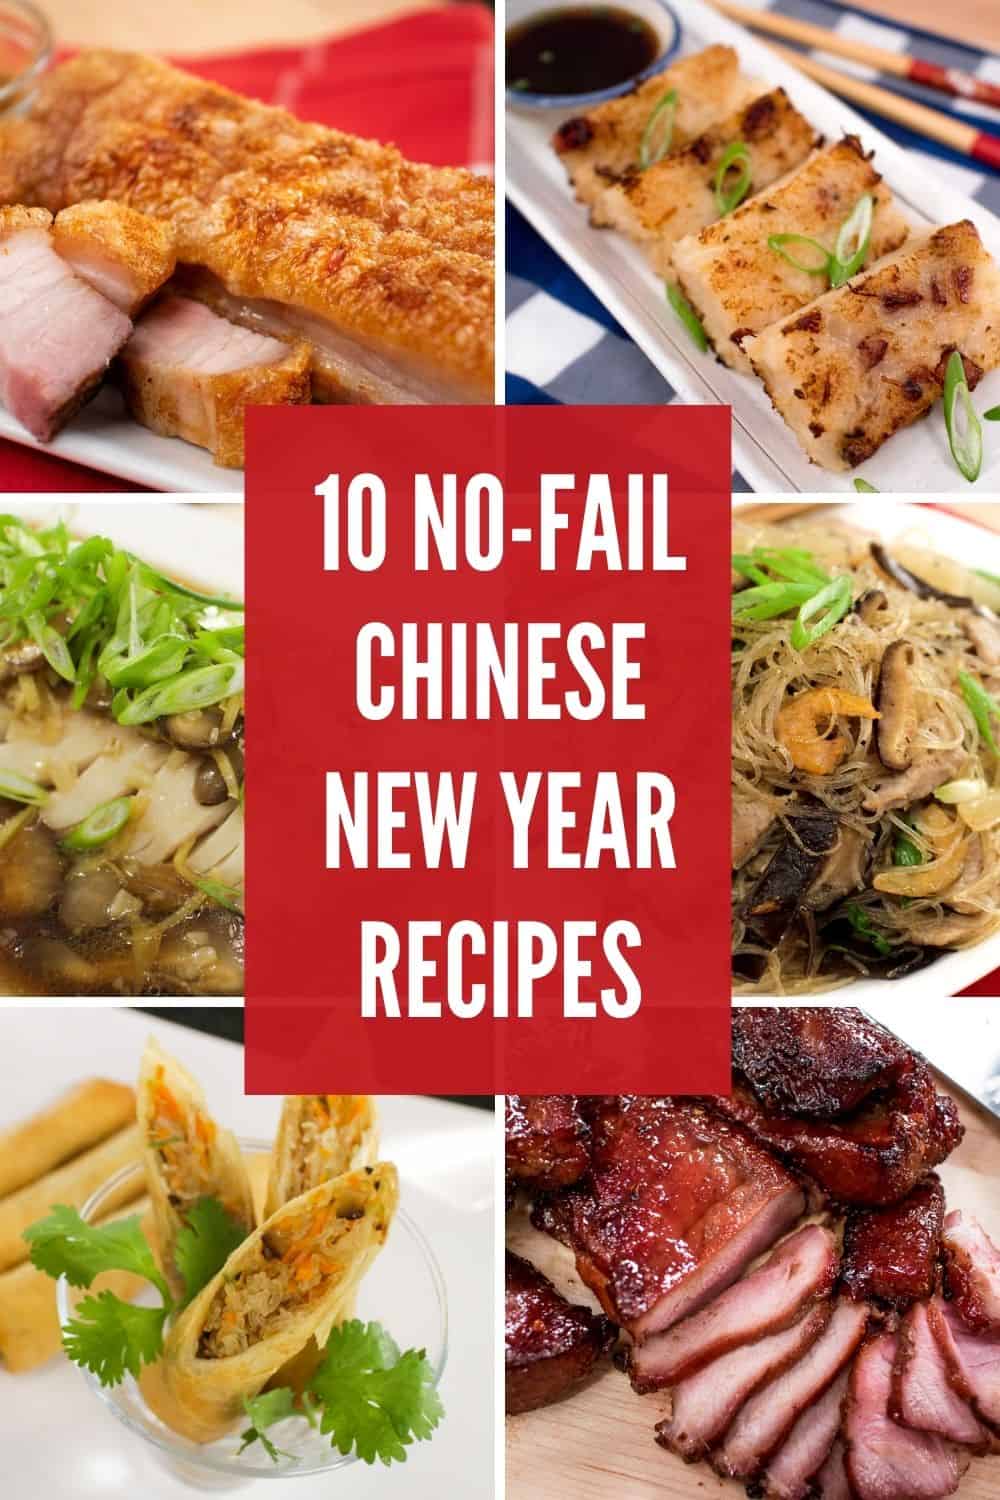 A grid of 6 images of Chinese new year recipes with text in the middle that says: 10 no fail recipes for Chinese New Year